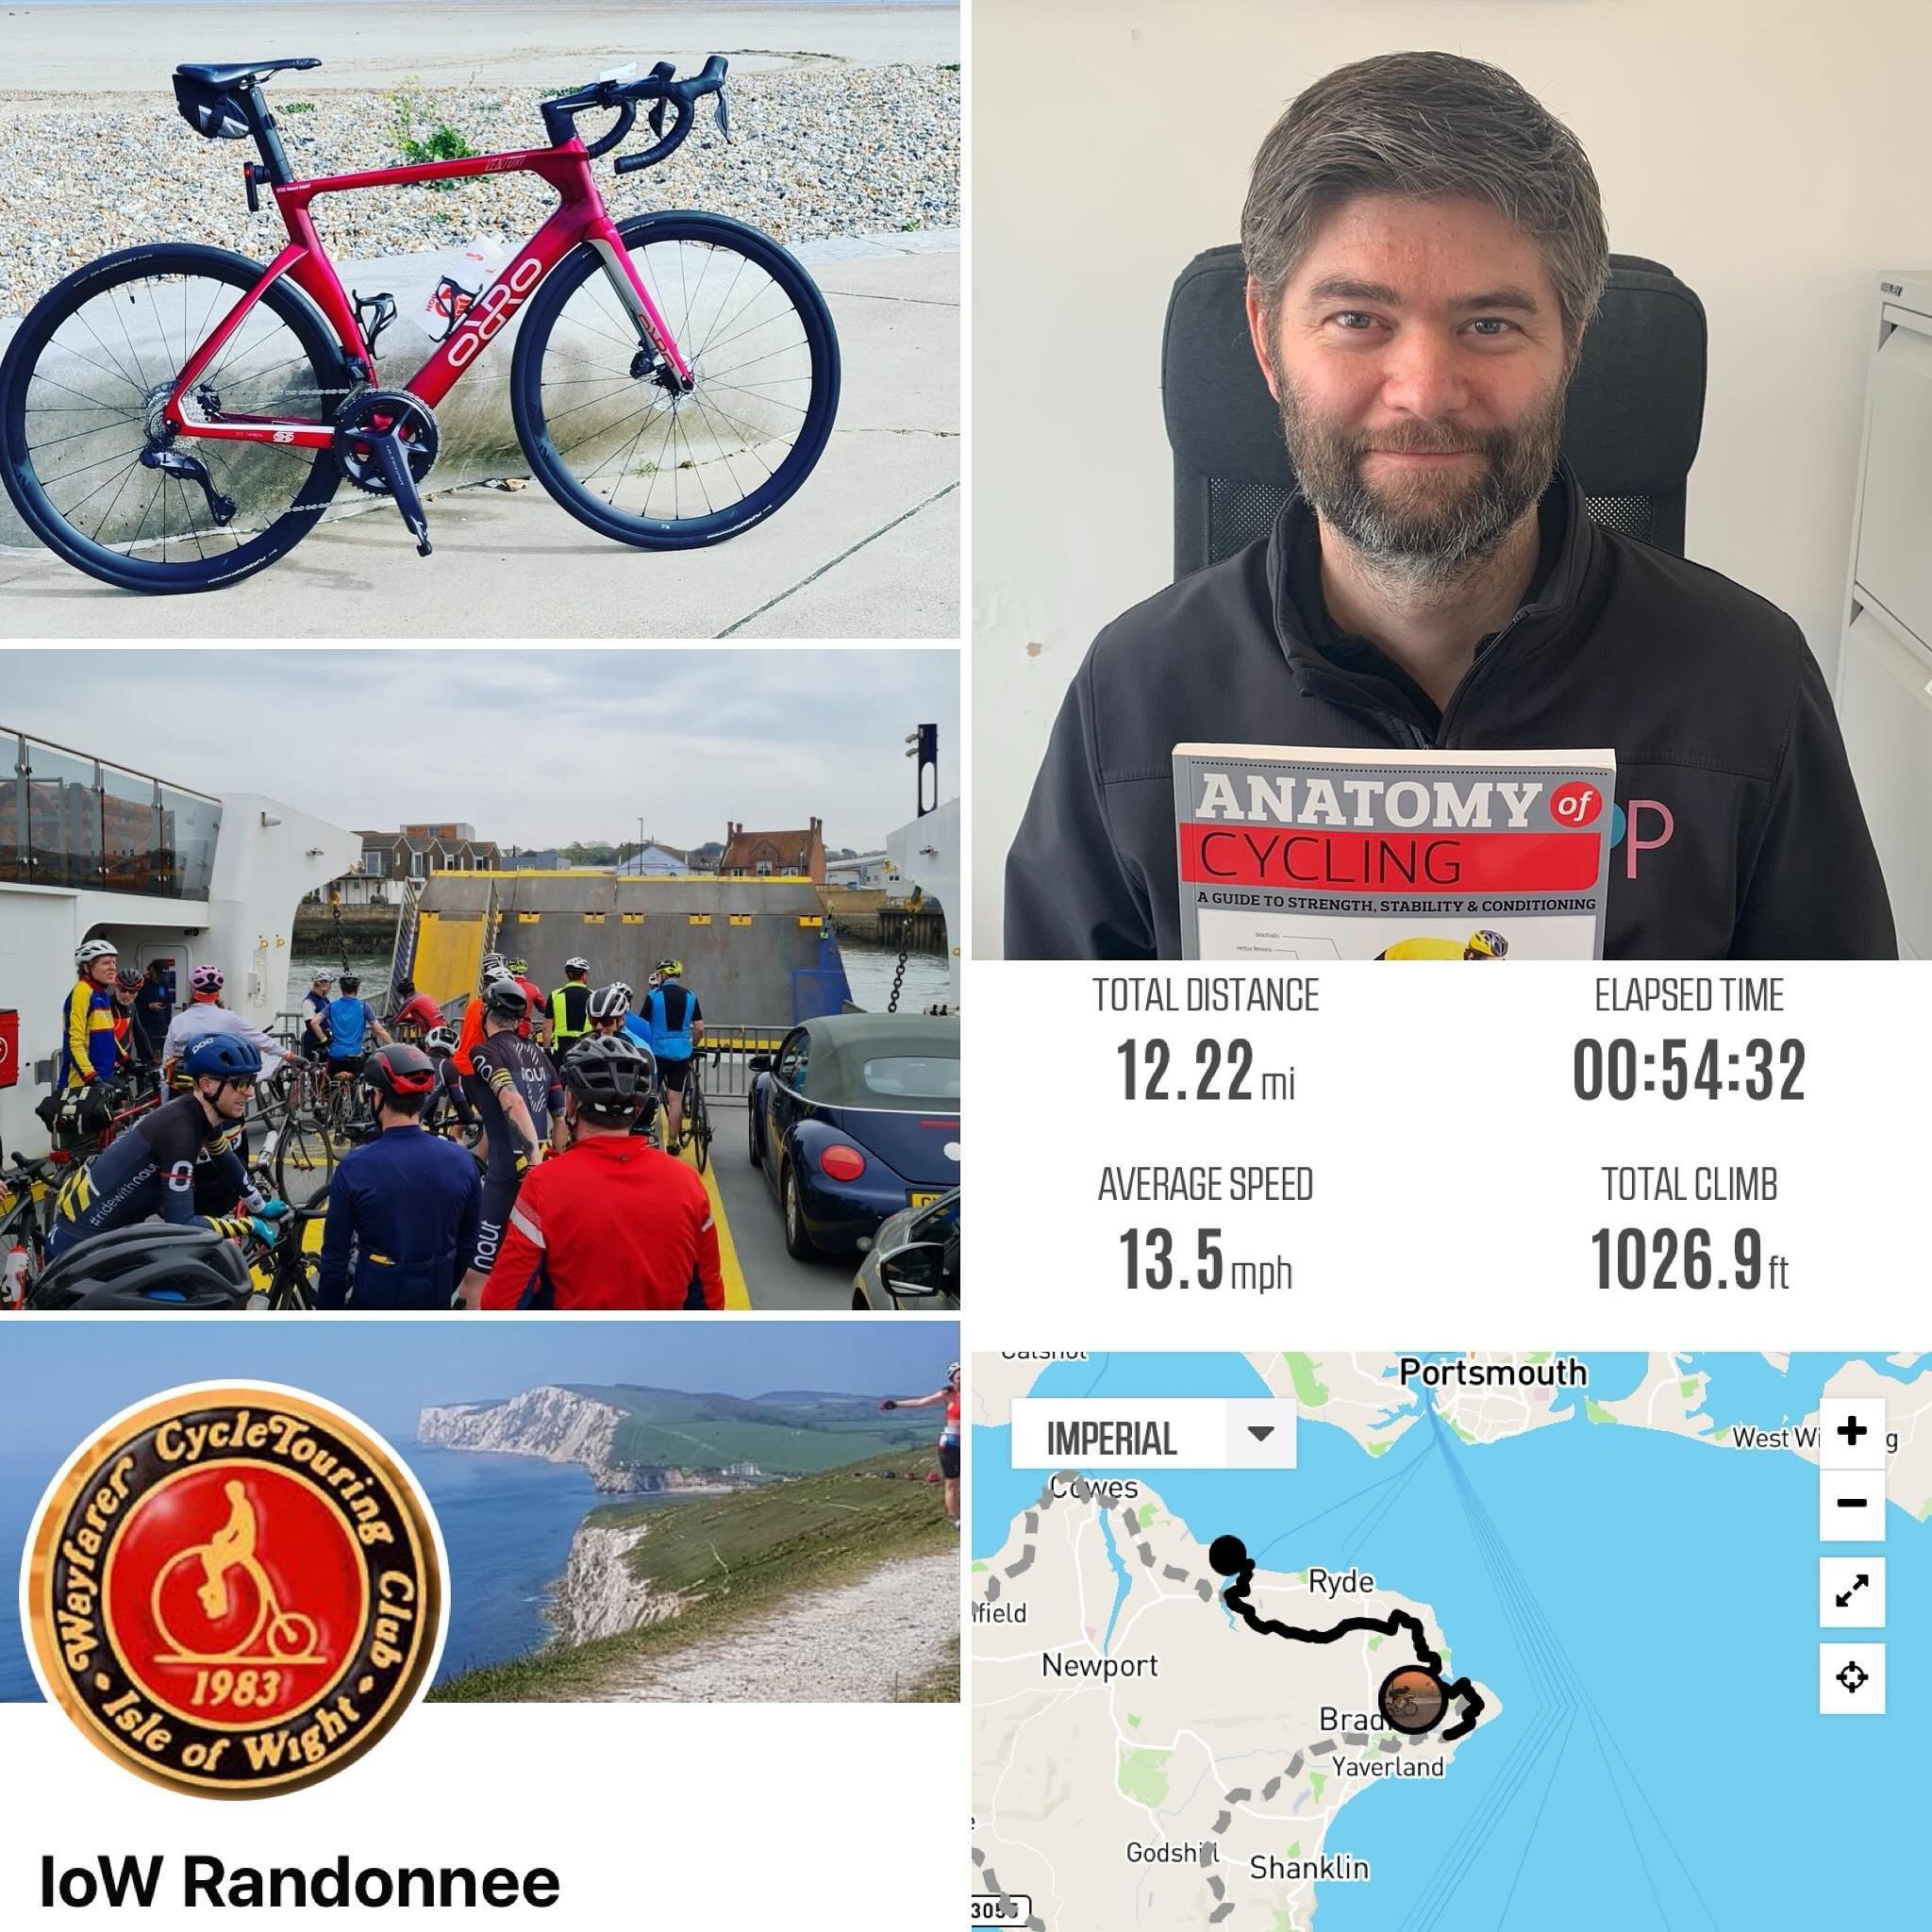 G O O D. L U C K to Stuart @stuart.hart.bike today who is currently cycling around the Isle of Wight in the @iowrandonnee 🚴🏽&zwj;♀️

We&rsquo;re tracking his progress, and he&rsquo;s currently just over 19 km into his 100km route&hellip;go Stuey!!!